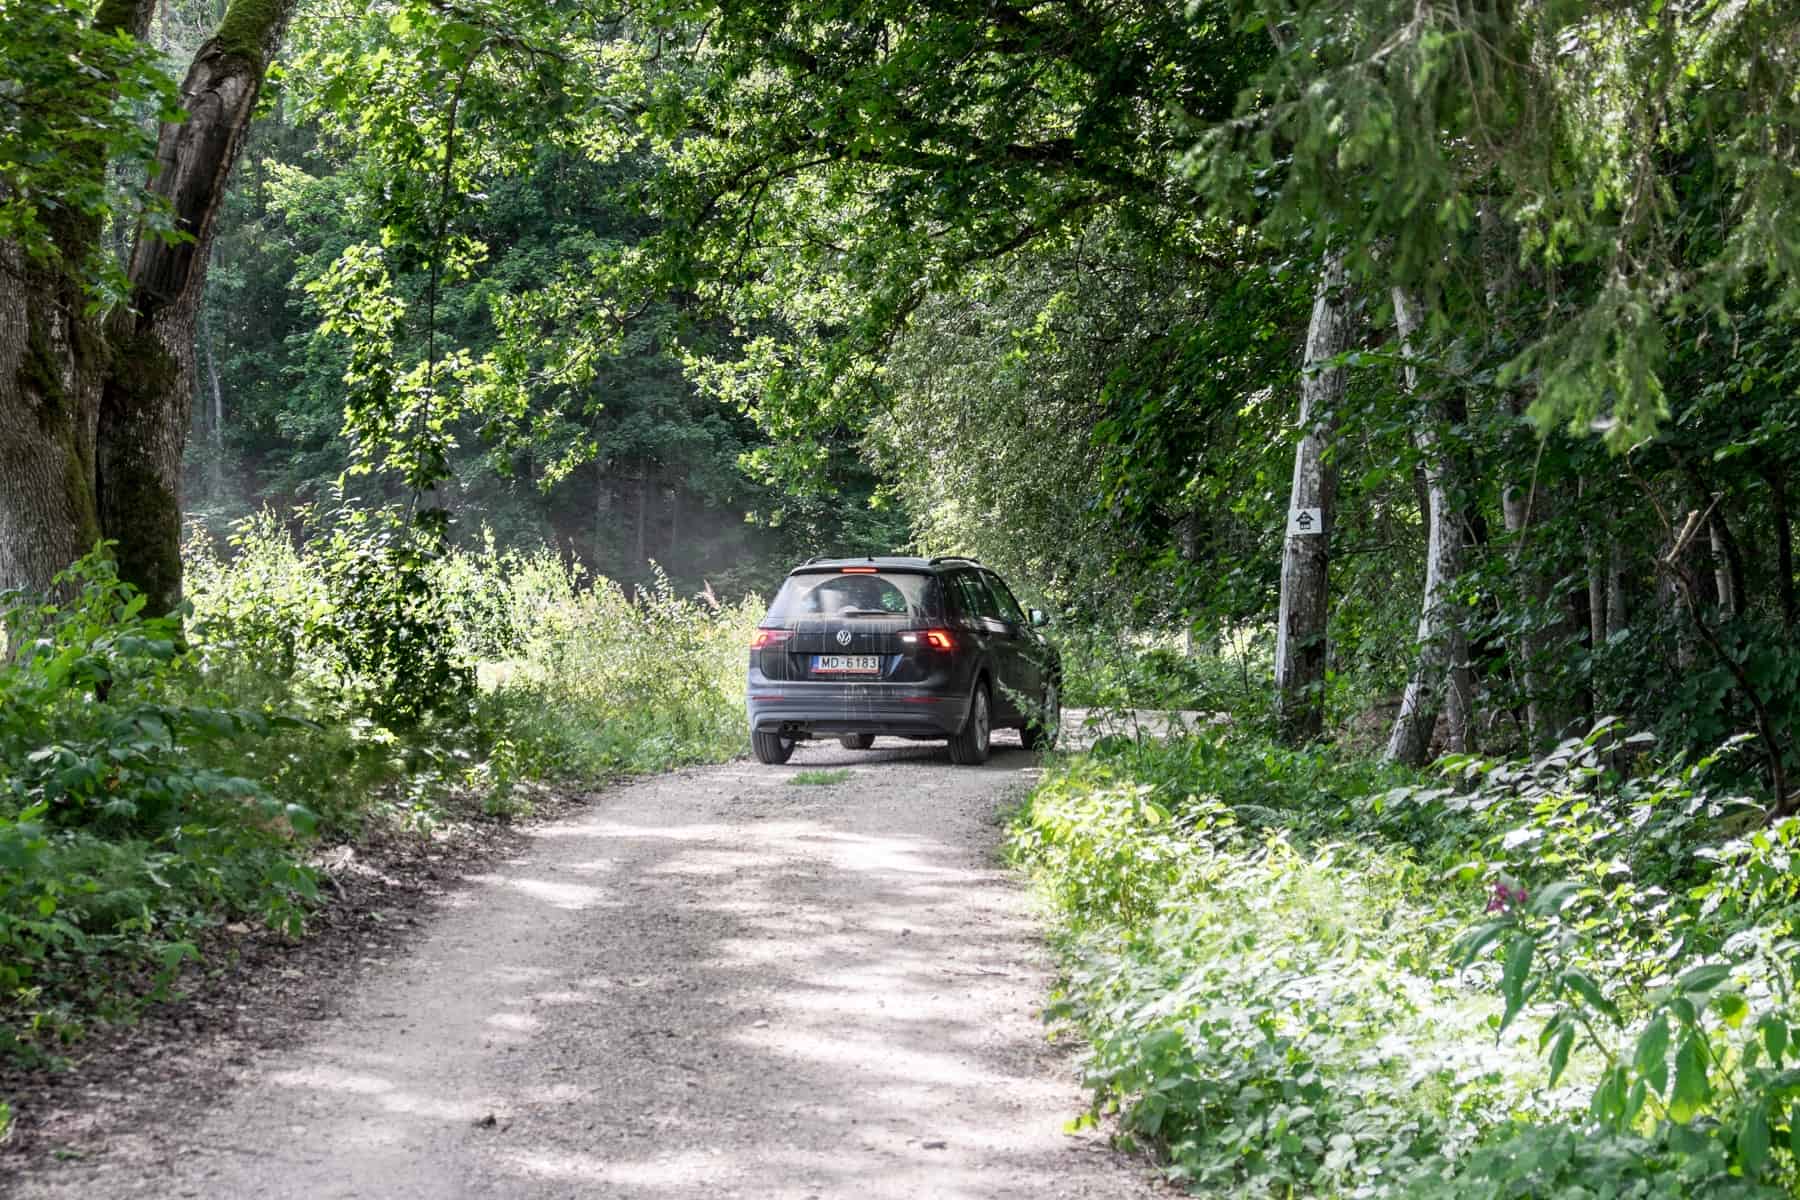 A small black. car drives on a grey gravel road through a dense green forest that almost forms an archway over the road.